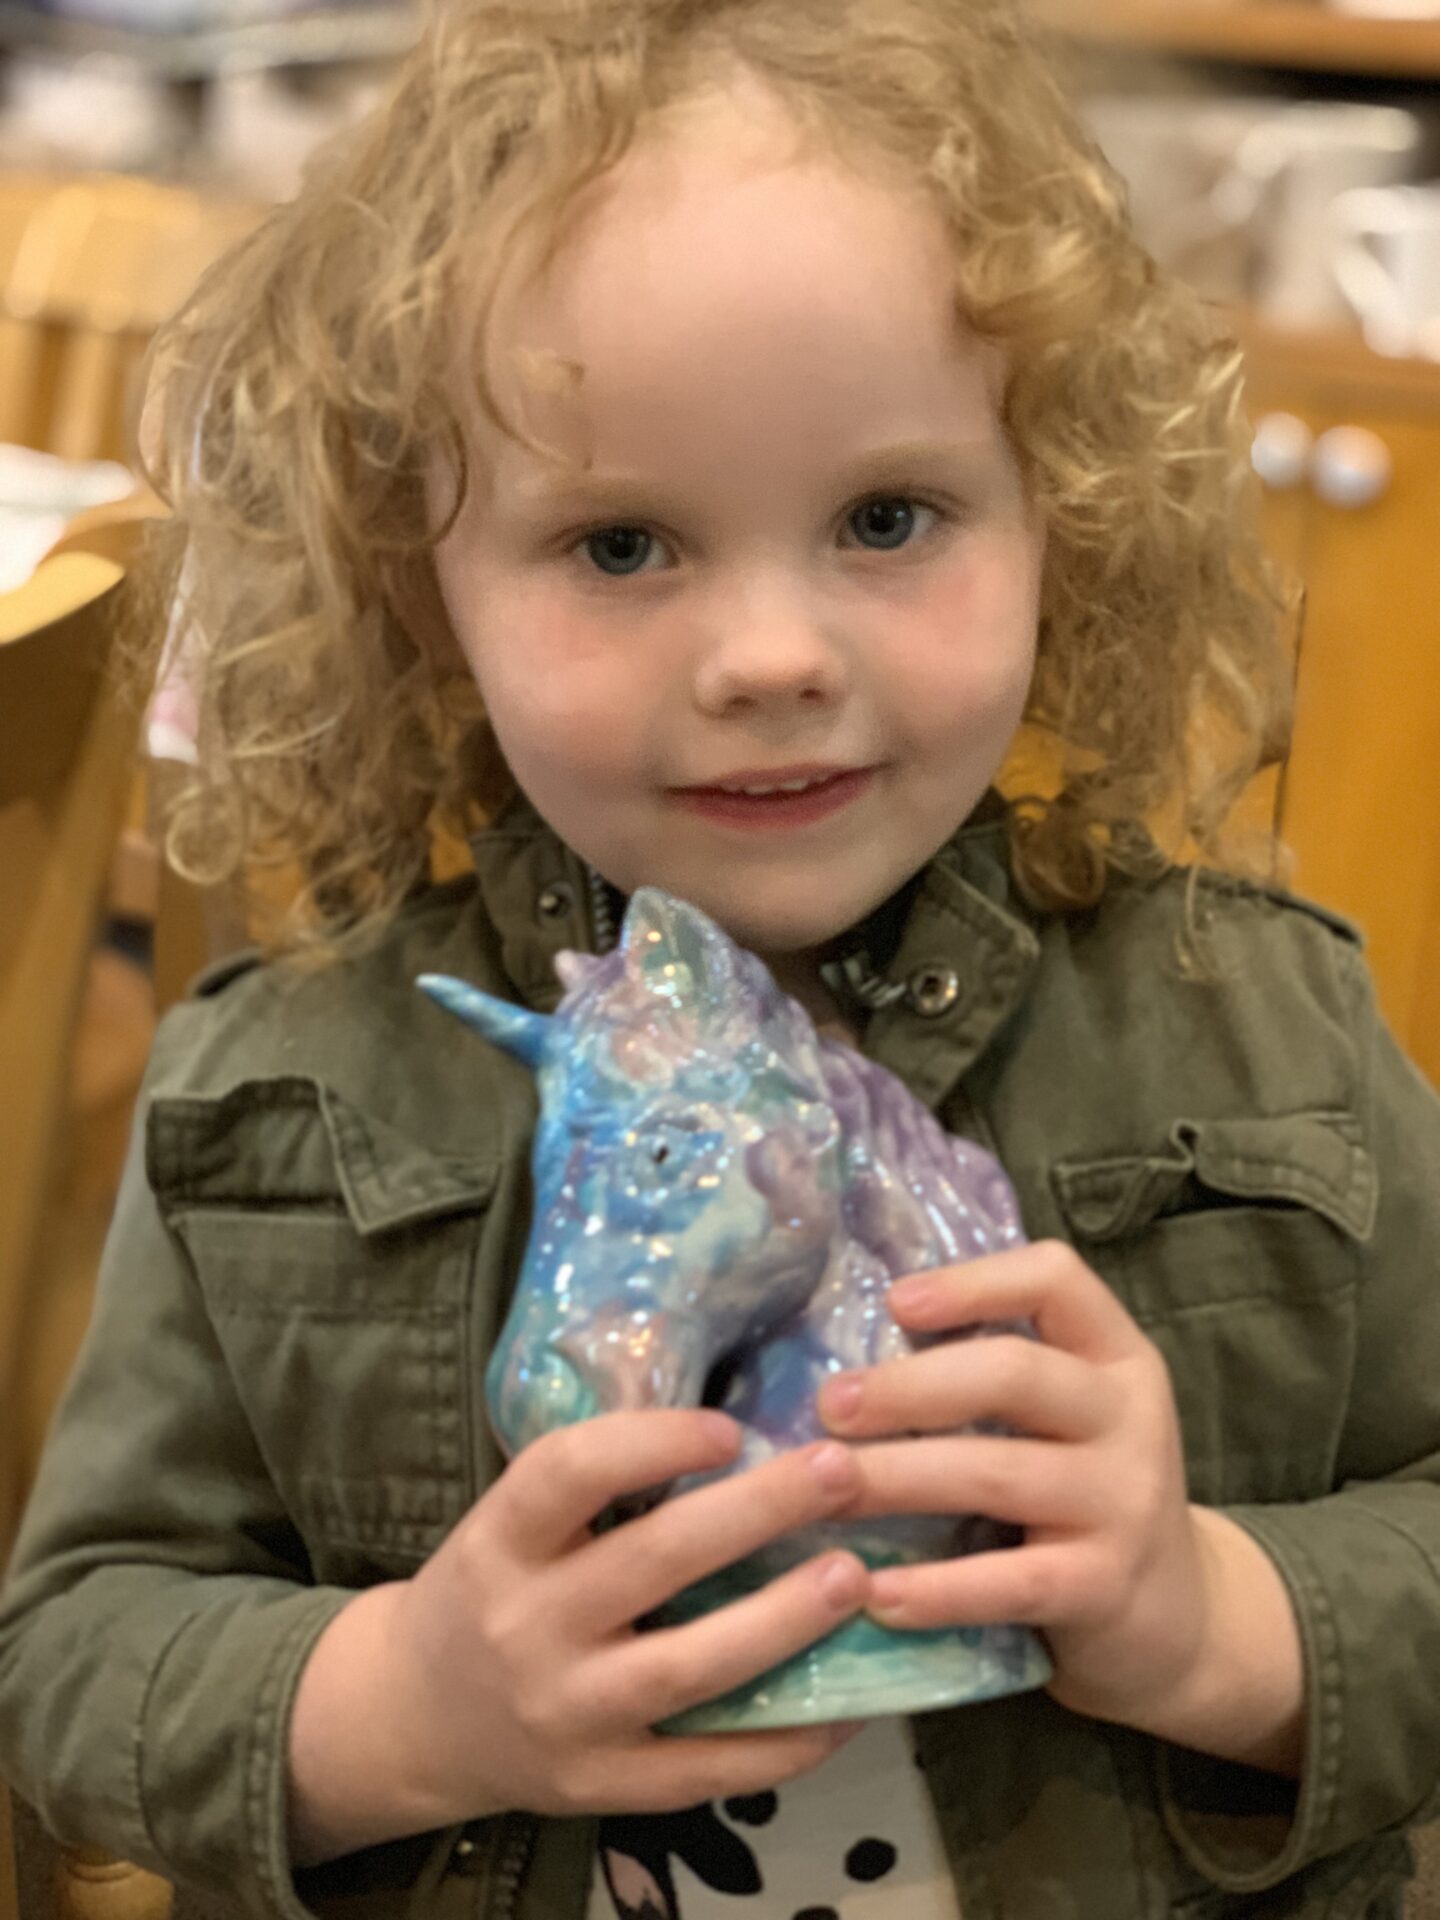 Cute little girl holding a unicorn clay toy